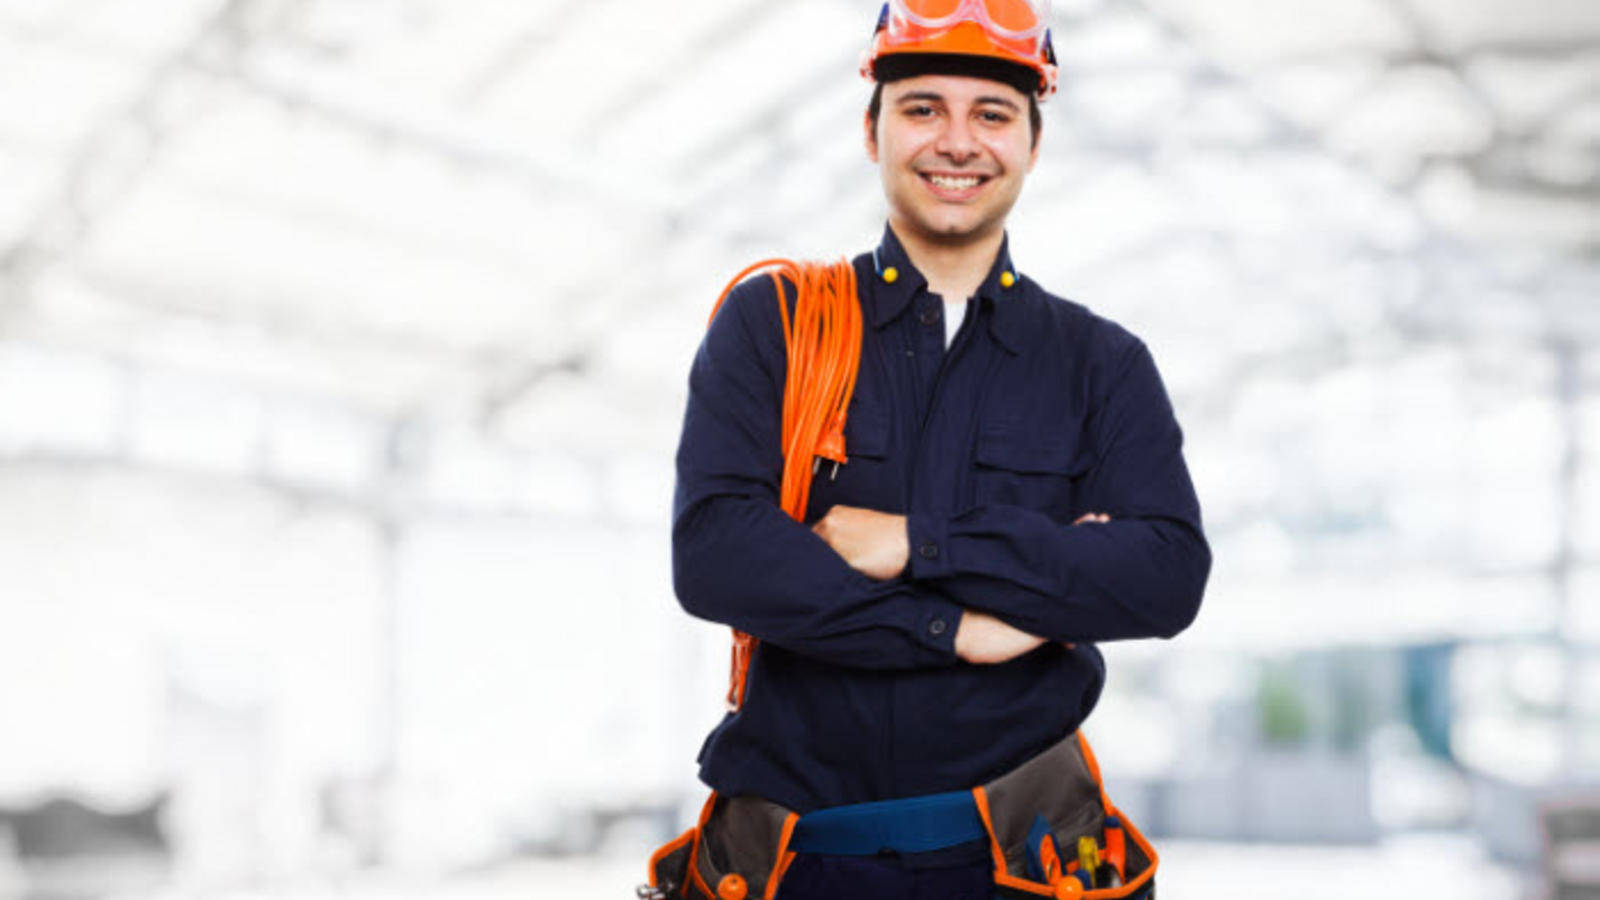 Professional Electrician Smiling at Work Wallpaper